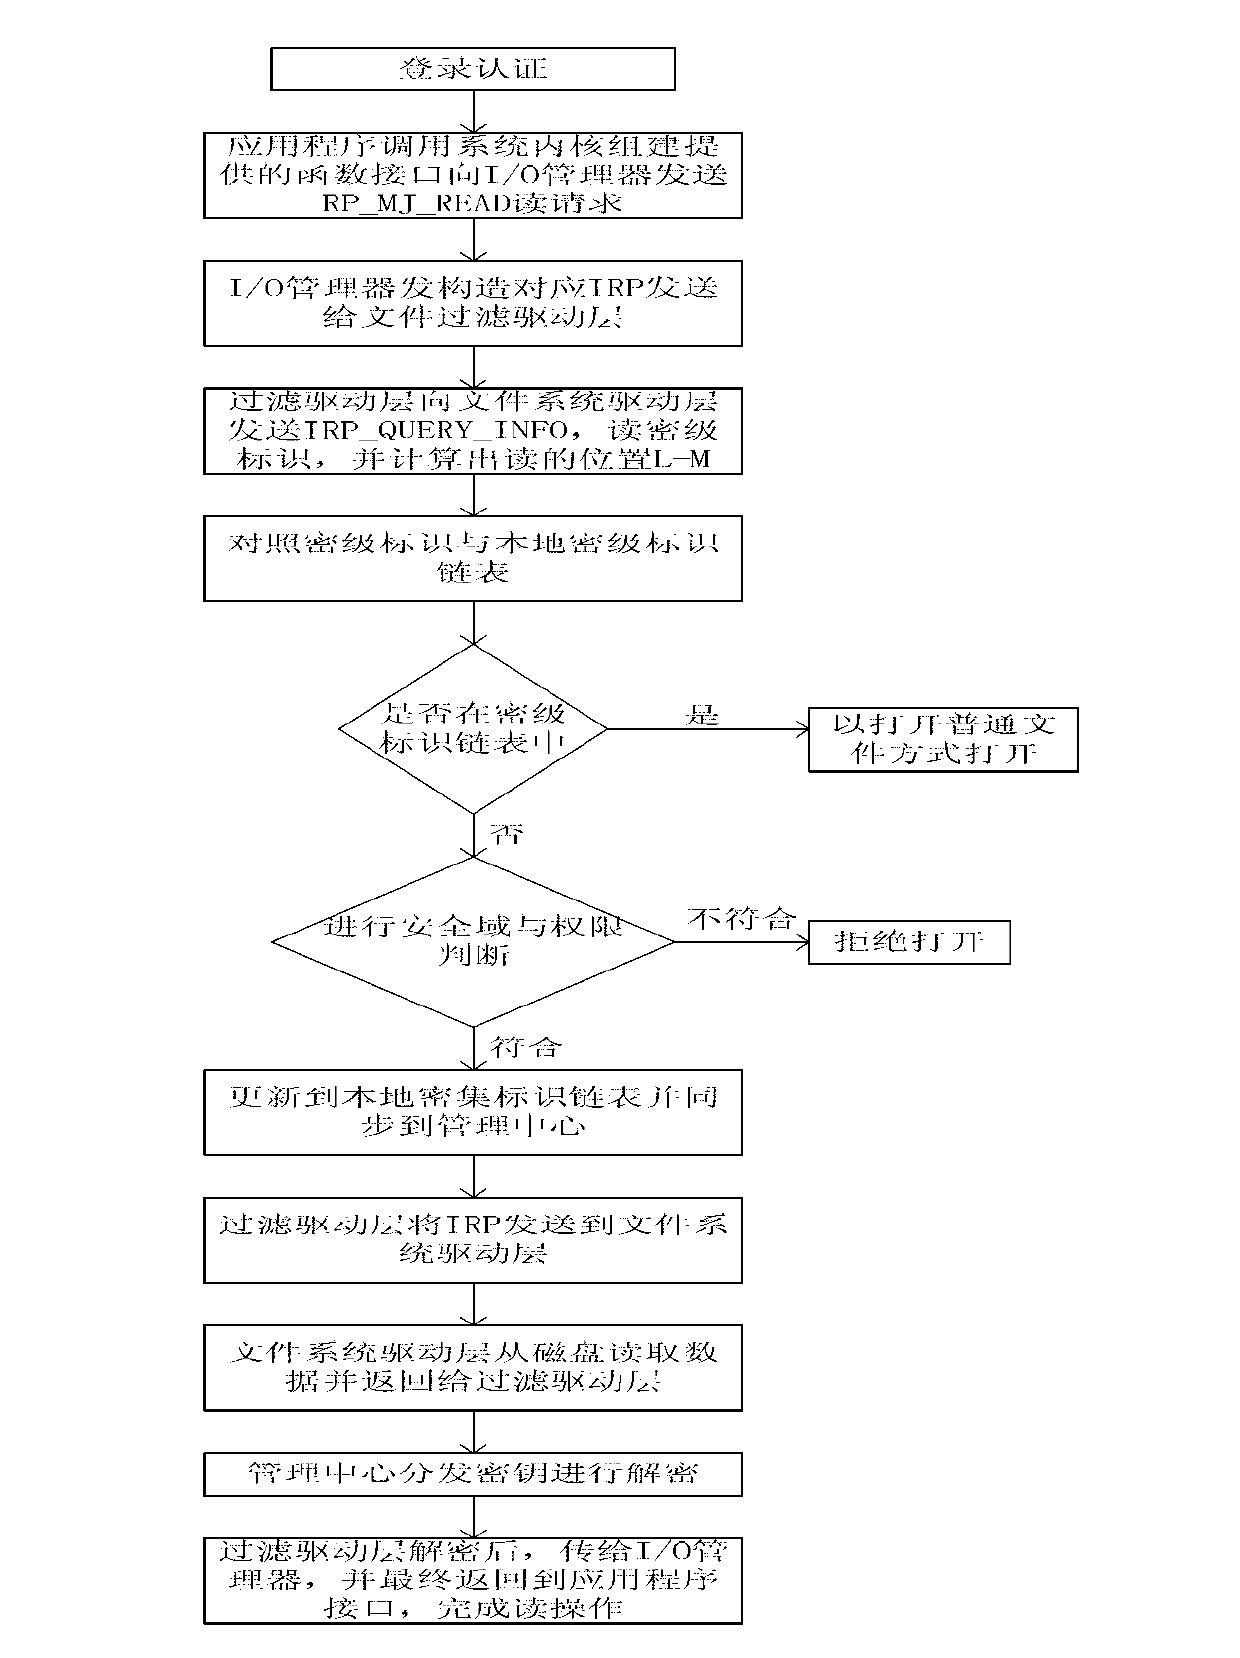 Multi-stage domain protection method and system based on information security level identifiers